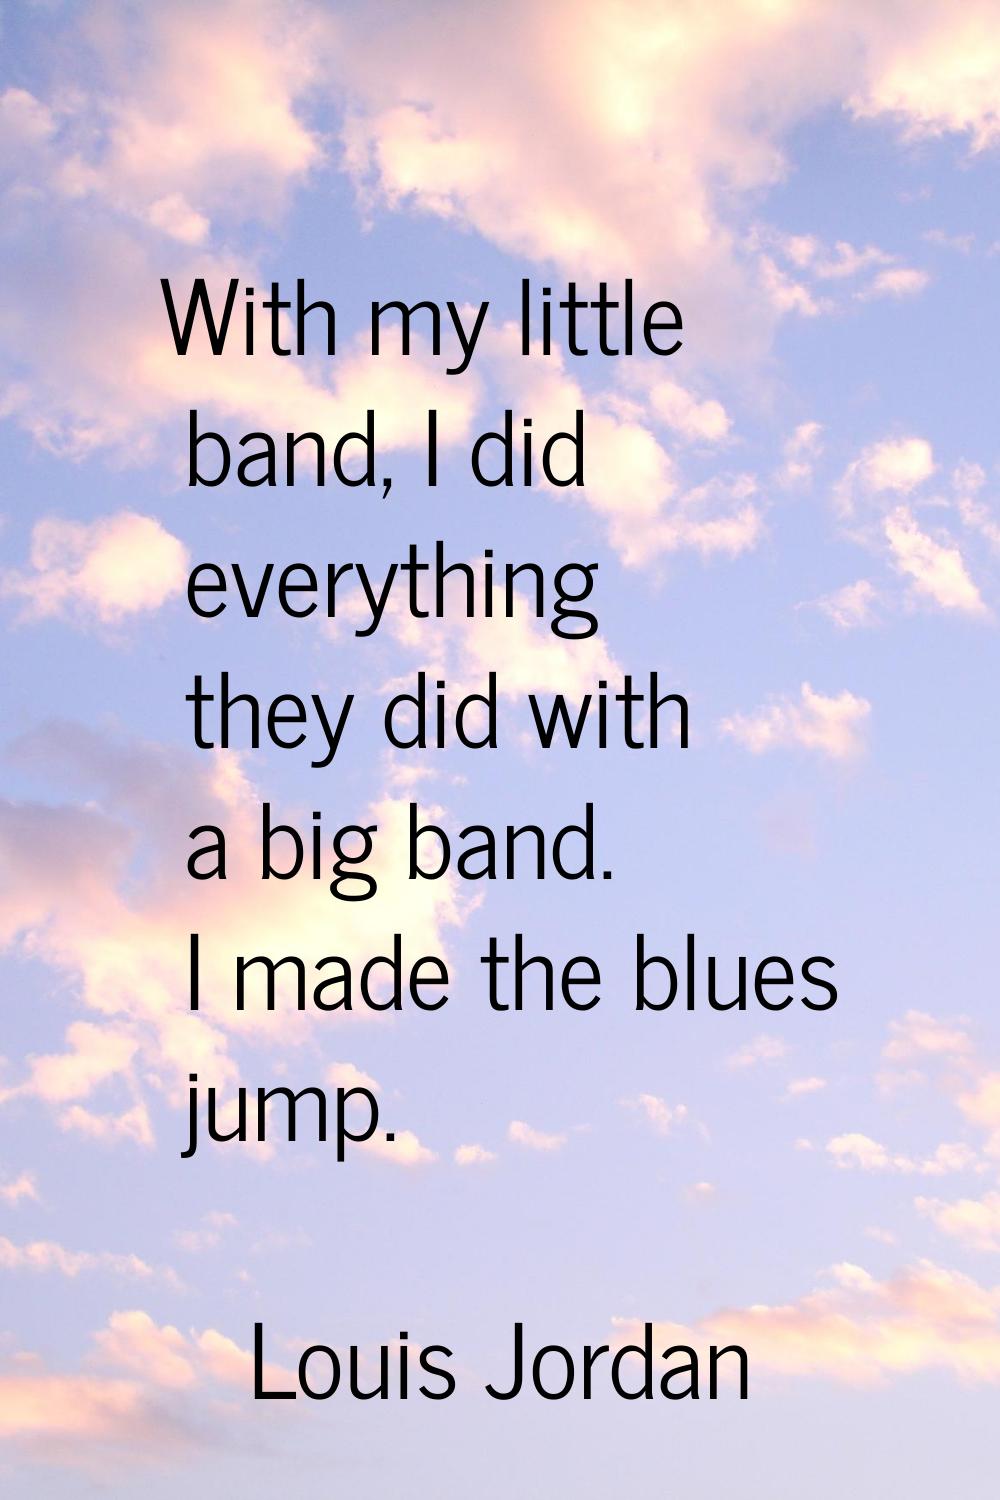 With my little band, I did everything they did with a big band. I made the blues jump.